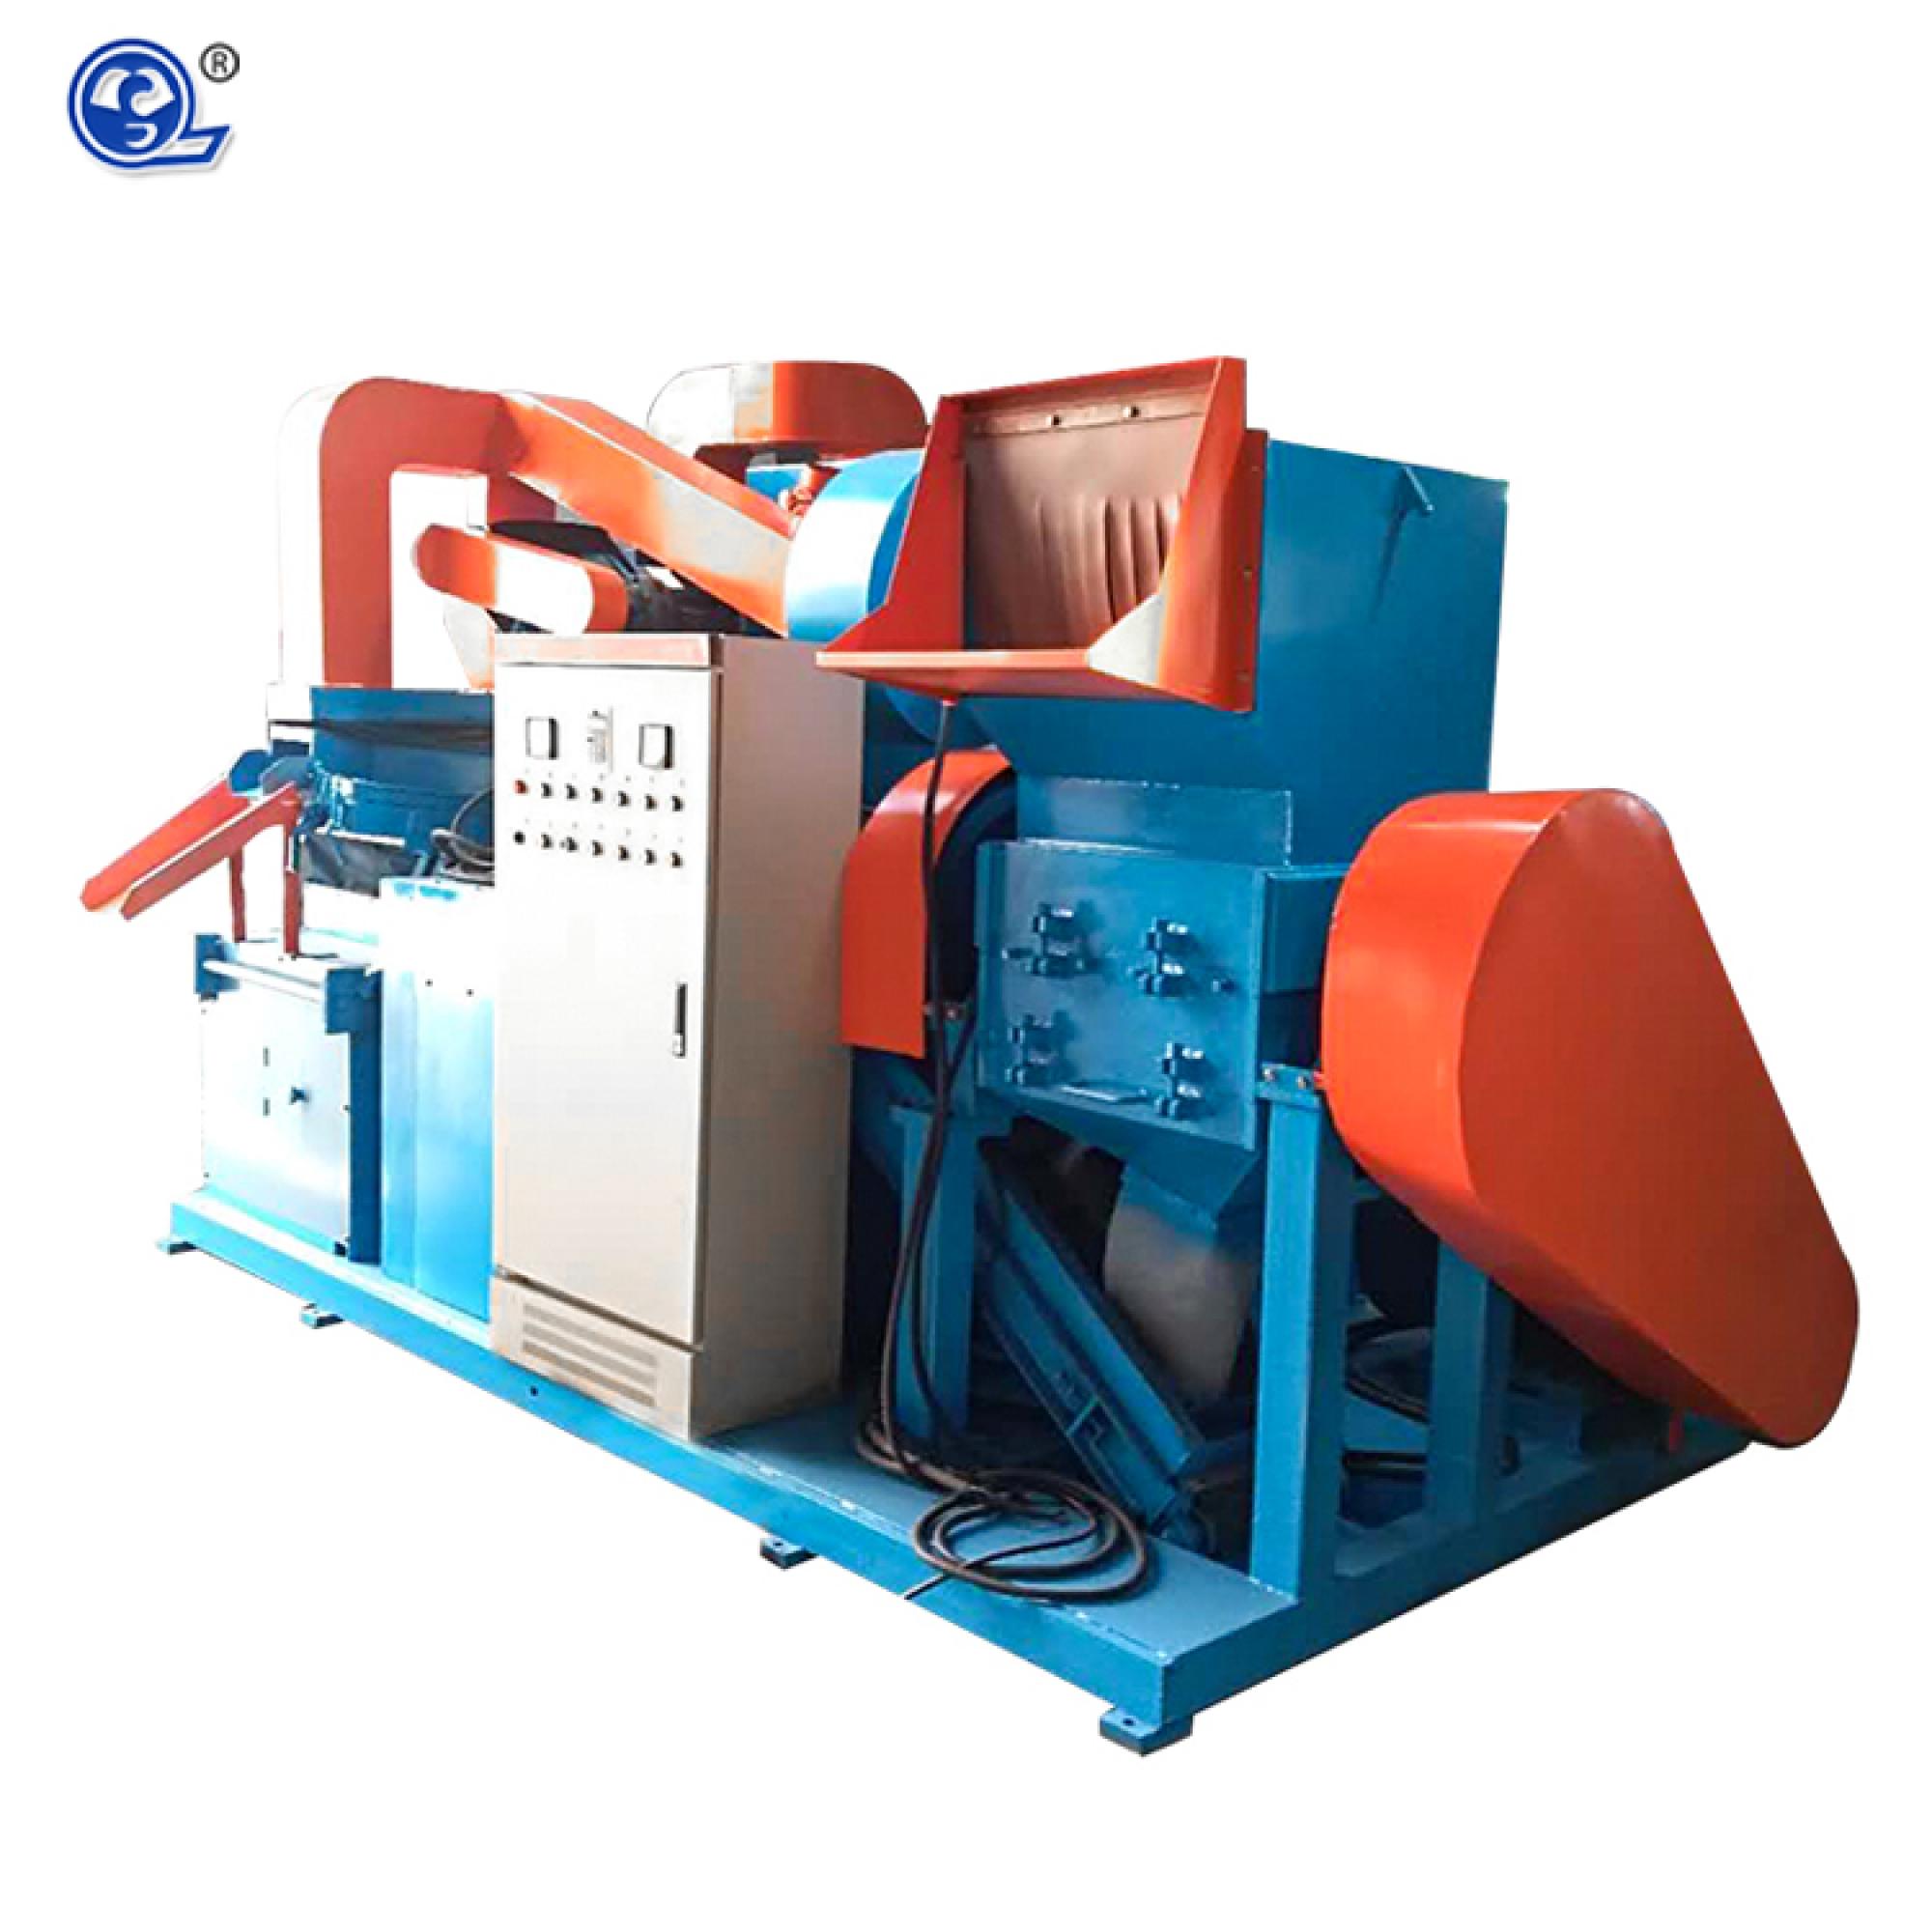 MX-600 Waste Copper Wires Recycling Machine